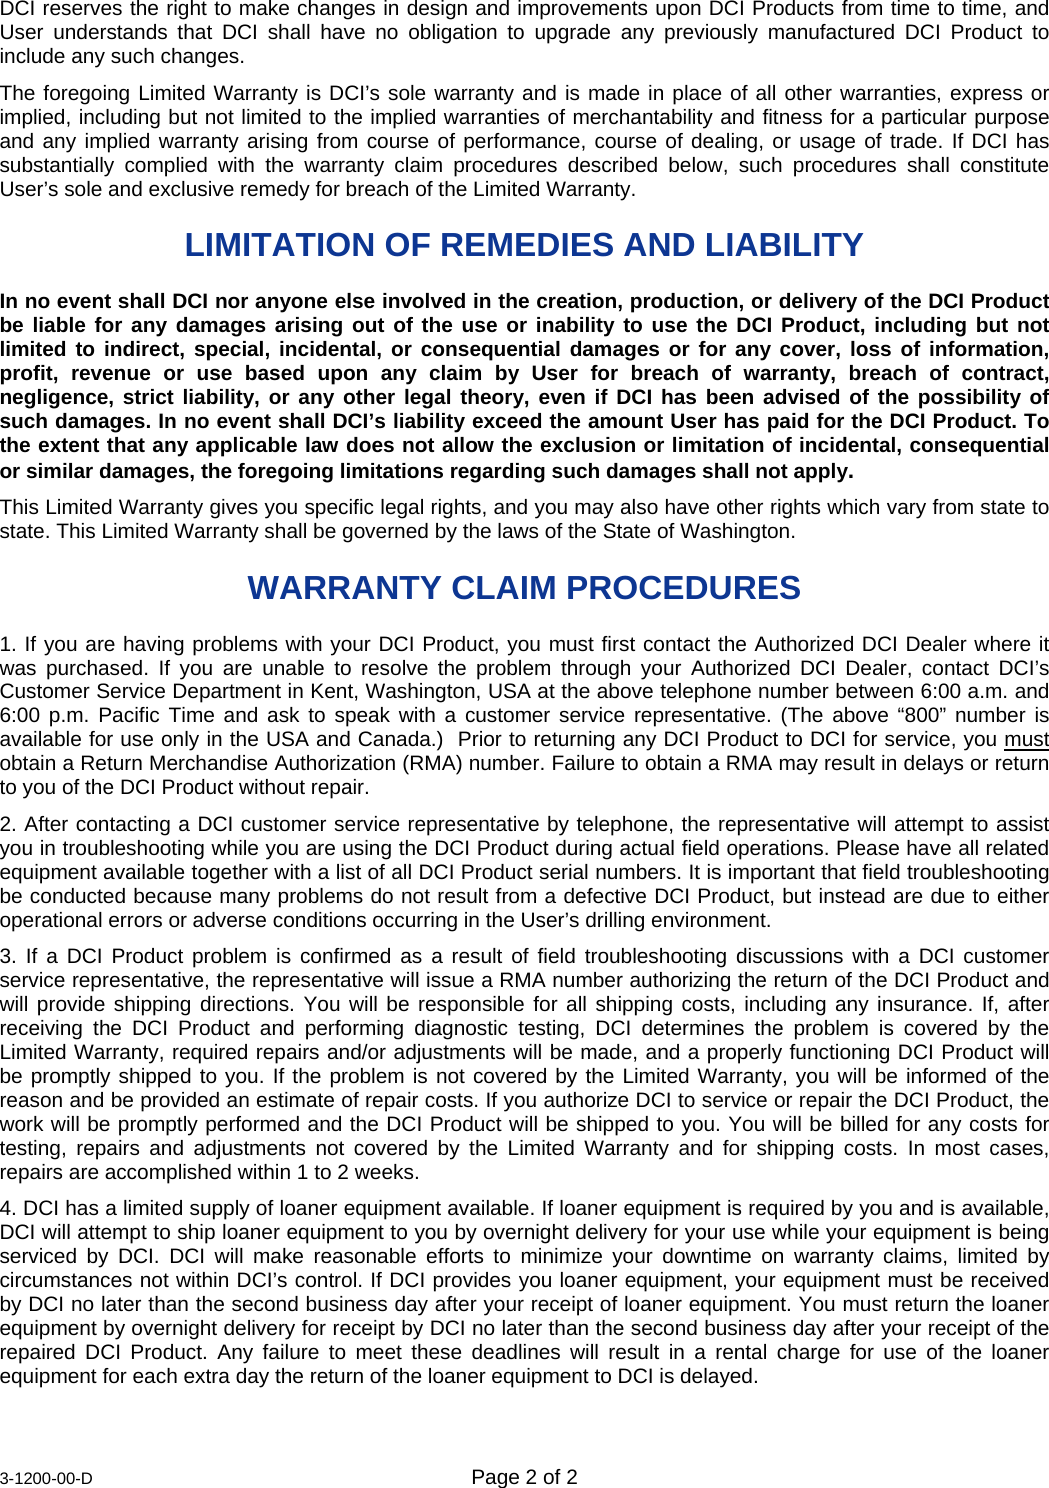  3-1200-00-D  Page 2 of 2 DCI reserves the right to make changes in design and improvements upon DCI Products from time to time, and User understands that DCI shall have no obligation to upgrade any previously manufactured DCI Product to include any such changes. The foregoing Limited Warranty is DCI’s sole warranty and is made in place of all other warranties, express or implied, including but not limited to the implied warranties of merchantability and fitness for a particular purpose and any implied warranty arising from course of performance, course of dealing, or usage of trade. If DCI has substantially complied with the warranty claim procedures described below, such procedures shall constitute User’s sole and exclusive remedy for breach of the Limited Warranty. LIMITATION OF REMEDIES AND LIABILITY  In no event shall DCI nor anyone else involved in the creation, production, or delivery of the DCI Product be liable for any damages arising out of the use or inability to use the DCI Product, including but not limited to indirect, special, incidental, or consequential damages or for any cover, loss of information, profit, revenue or use based upon any claim by User for breach of warranty, breach of contract, negligence, strict liability, or any other legal theory, even if DCI has been advised of the possibility of such damages. In no event shall DCI’s liability exceed the amount User has paid for the DCI Product. To the extent that any applicable law does not allow the exclusion or limitation of incidental, consequential or similar damages, the foregoing limitations regarding such damages shall not apply. This Limited Warranty gives you specific legal rights, and you may also have other rights which vary from state to state. This Limited Warranty shall be governed by the laws of the State of Washington. WARRANTY CLAIM PROCEDURES 1. If you are having problems with your DCI Product, you must first contact the Authorized DCI Dealer where it was purchased. If you are unable to resolve the problem through your Authorized DCI Dealer, contact DCI’s Customer Service Department in Kent, Washington, USA at the above telephone number between 6:00 a.m. and 6:00 p.m. Pacific Time and ask to speak with a customer service representative. (The above “800” number is available for use only in the USA and Canada.)  Prior to returning any DCI Product to DCI for service, you must obtain a Return Merchandise Authorization (RMA) number. Failure to obtain a RMA may result in delays or return to you of the DCI Product without repair. 2. After contacting a DCI customer service representative by telephone, the representative will attempt to assist you in troubleshooting while you are using the DCI Product during actual field operations. Please have all related equipment available together with a list of all DCI Product serial numbers. It is important that field troubleshooting be conducted because many problems do not result from a defective DCI Product, but instead are due to either operational errors or adverse conditions occurring in the User’s drilling environment. 3. If a DCI Product problem is confirmed as a result of field troubleshooting discussions with a DCI customer service representative, the representative will issue a RMA number authorizing the return of the DCI Product and will provide shipping directions. You will be responsible for all shipping costs, including any insurance. If, after receiving the DCI Product and performing diagnostic testing, DCI determines the problem is covered by the Limited Warranty, required repairs and/or adjustments will be made, and a properly functioning DCI Product will be promptly shipped to you. If the problem is not covered by the Limited Warranty, you will be informed of the reason and be provided an estimate of repair costs. If you authorize DCI to service or repair the DCI Product, the work will be promptly performed and the DCI Product will be shipped to you. You will be billed for any costs for testing, repairs and adjustments not covered by the Limited Warranty and for shipping costs. In most cases, repairs are accomplished within 1 to 2 weeks. 4. DCI has a limited supply of loaner equipment available. If loaner equipment is required by you and is available, DCI will attempt to ship loaner equipment to you by overnight delivery for your use while your equipment is being serviced by DCI. DCI will make reasonable efforts to minimize your downtime on warranty claims, limited by circumstances not within DCI’s control. If DCI provides you loaner equipment, your equipment must be received by DCI no later than the second business day after your receipt of loaner equipment. You must return the loaner equipment by overnight delivery for receipt by DCI no later than the second business day after your receipt of the repaired DCI Product. Any failure to meet these deadlines will result in a rental charge for use of the loaner equipment for each extra day the return of the loaner equipment to DCI is delayed. 